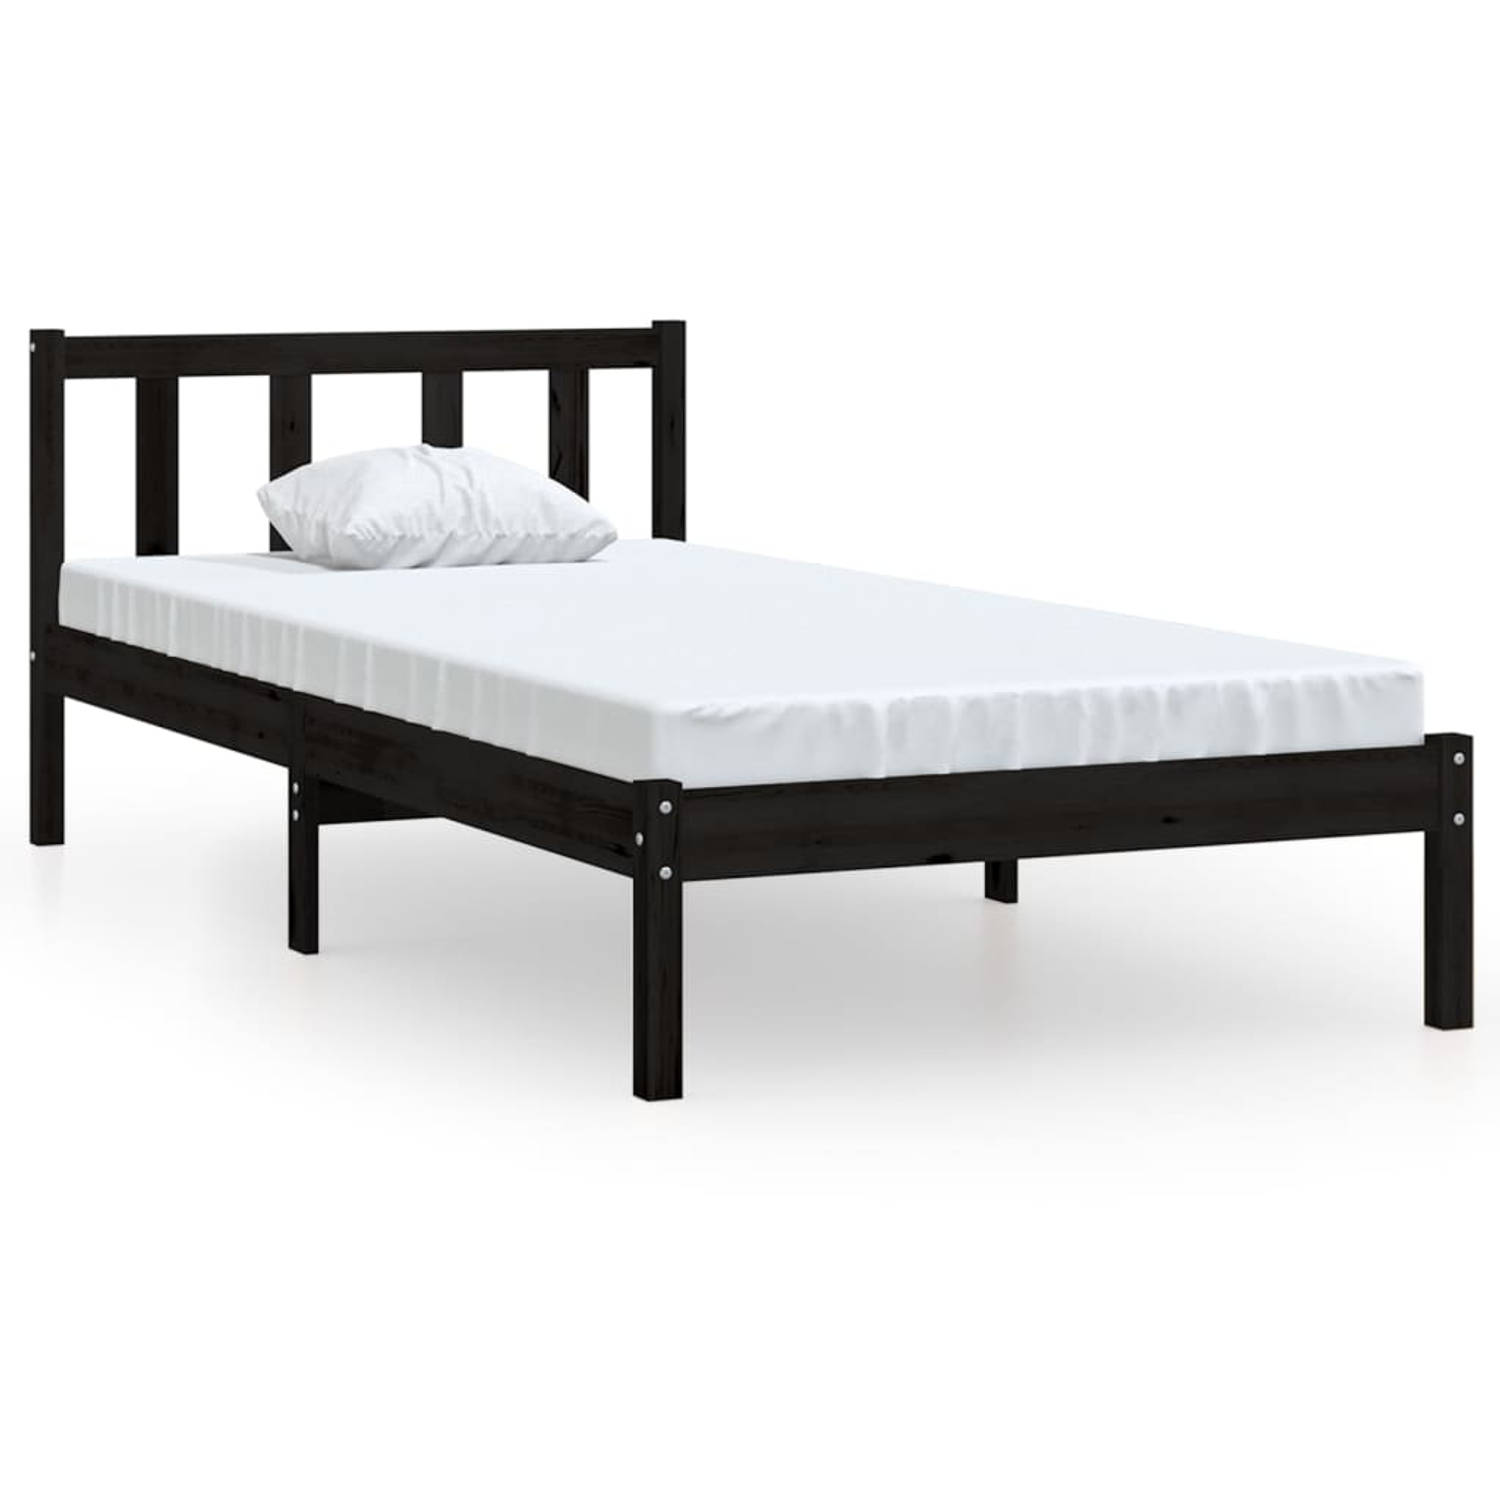 The Living Store Bedframe massief grenenhout zwart 90x200 cm - Bedframe - Bedframe - Bed Frame - Bed Frames - Bed - Bedden - 1-persoonsbed - 1-persoonsbedden - Eenpersoons Bed